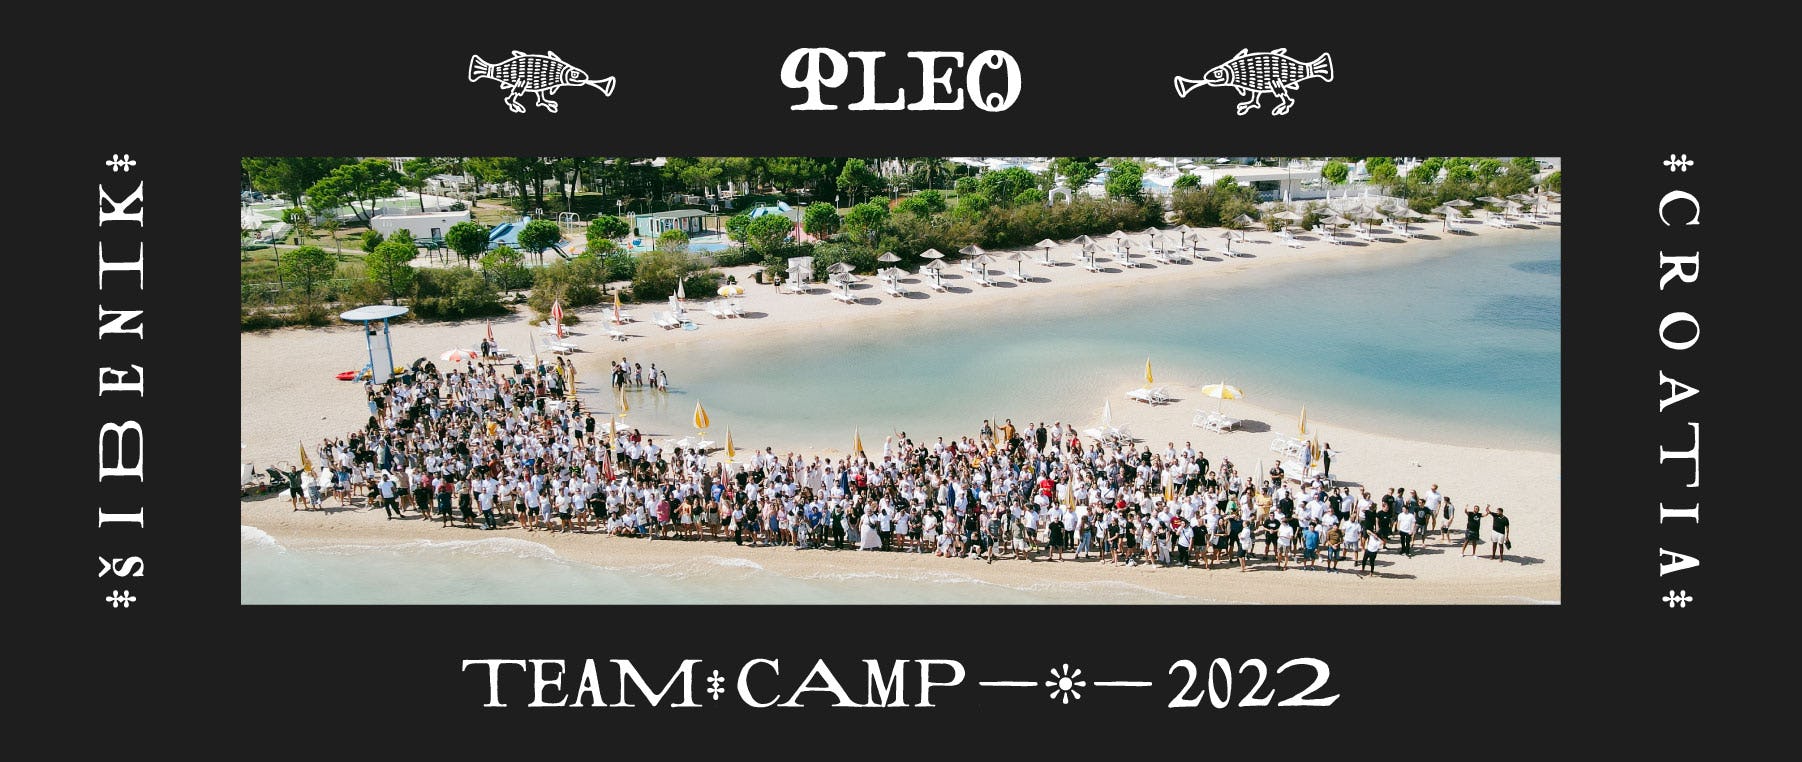 A photo captured by drone of 850 Pleo'ers on a beach in Croatia, the 2022 team camp destination